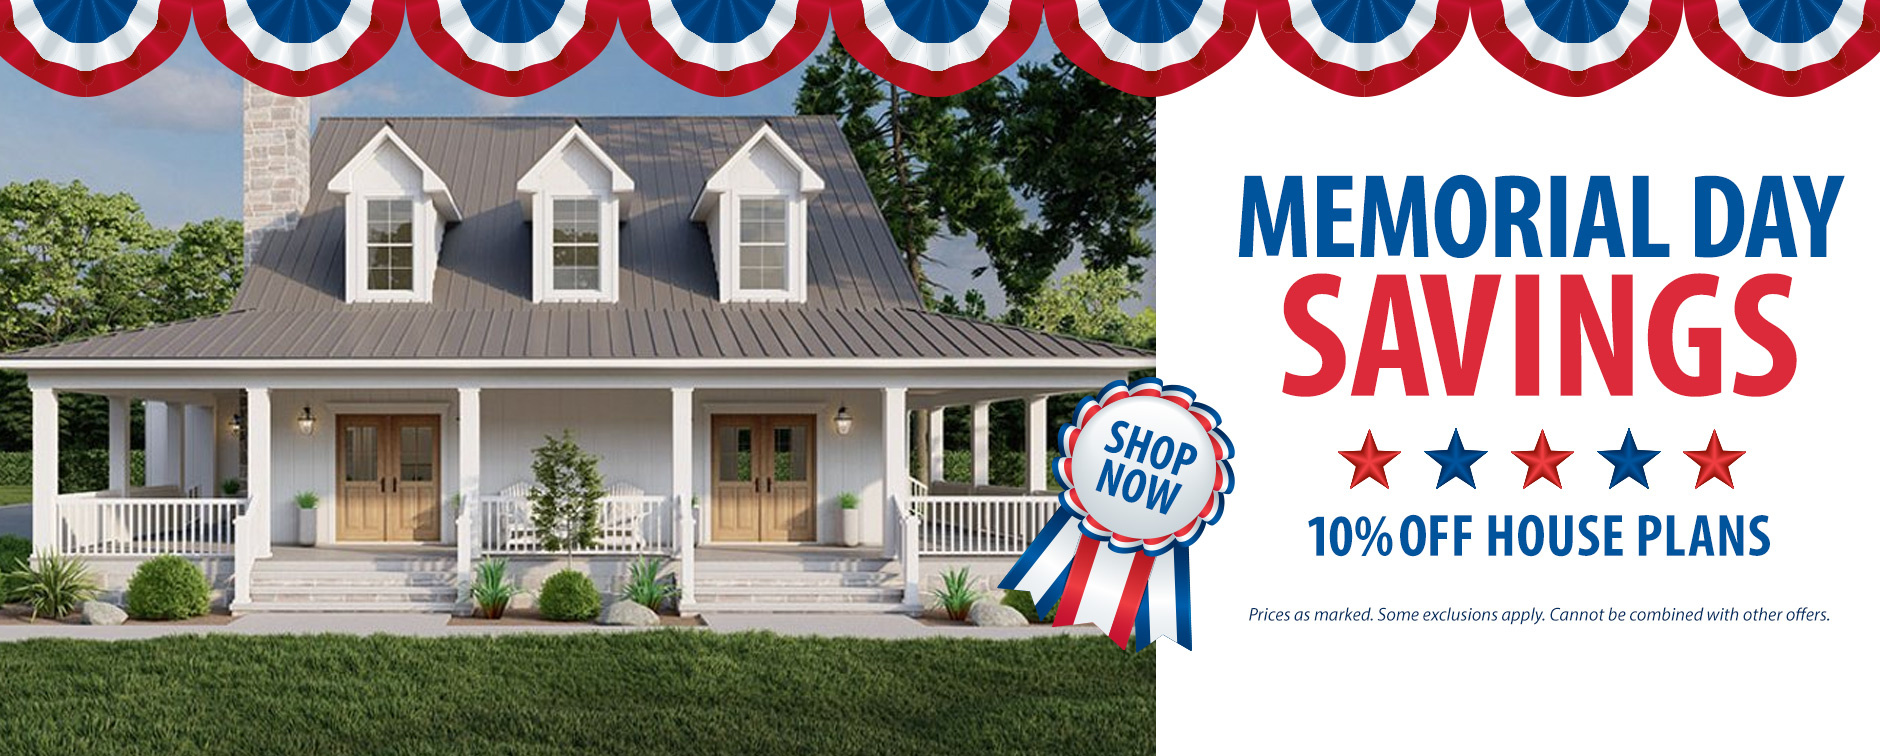 Explore the Memorial Day Sale and Get 10% Off House Plans